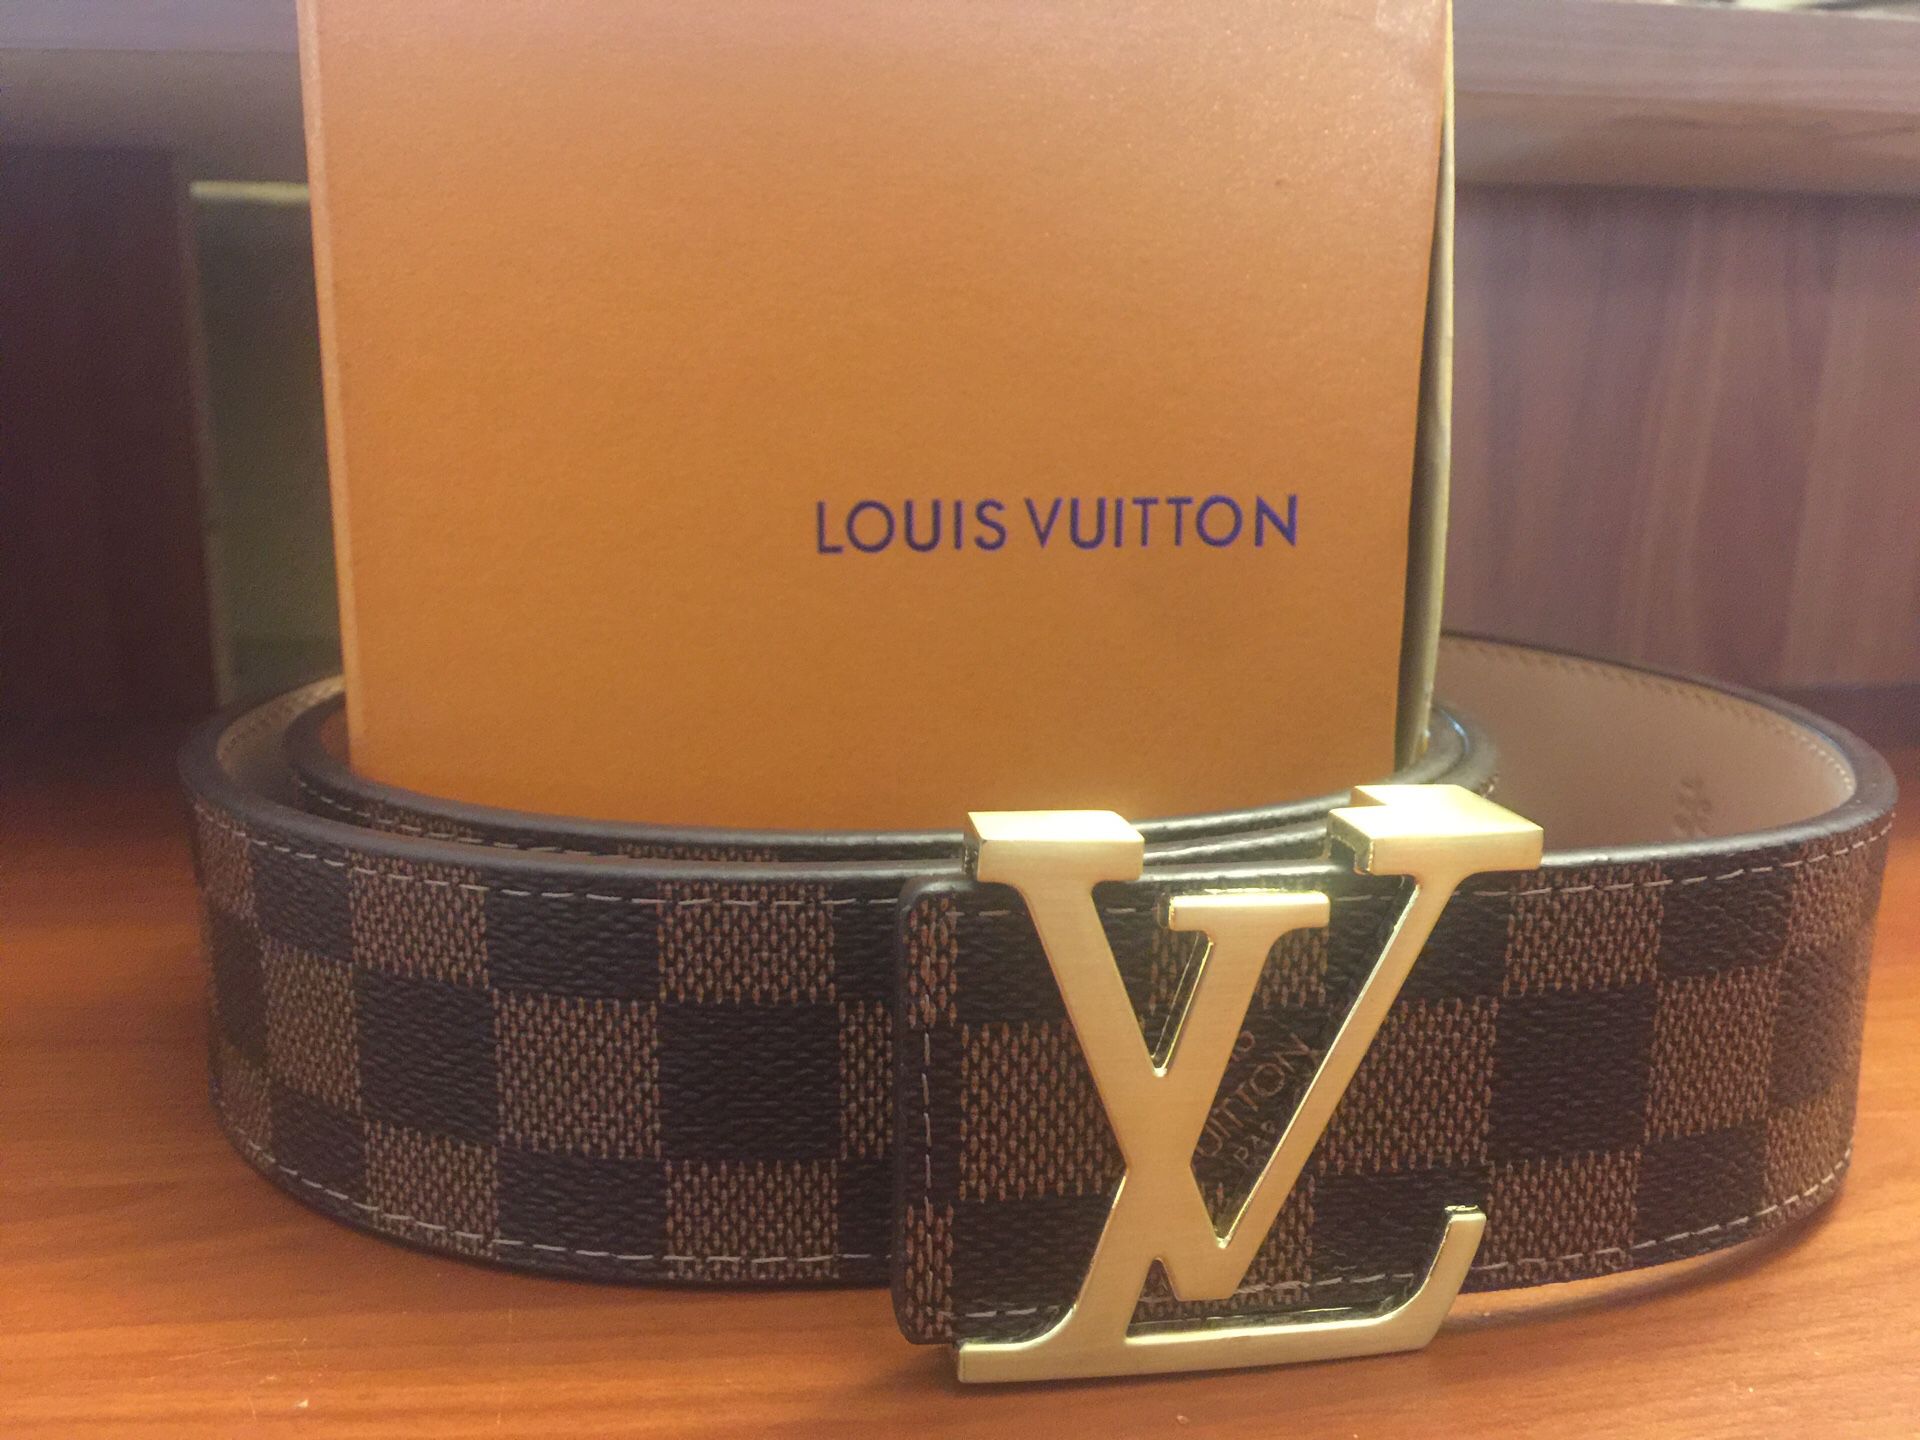 Vuitton Belt New in for Sale Sunnyvale, CA - OfferUp